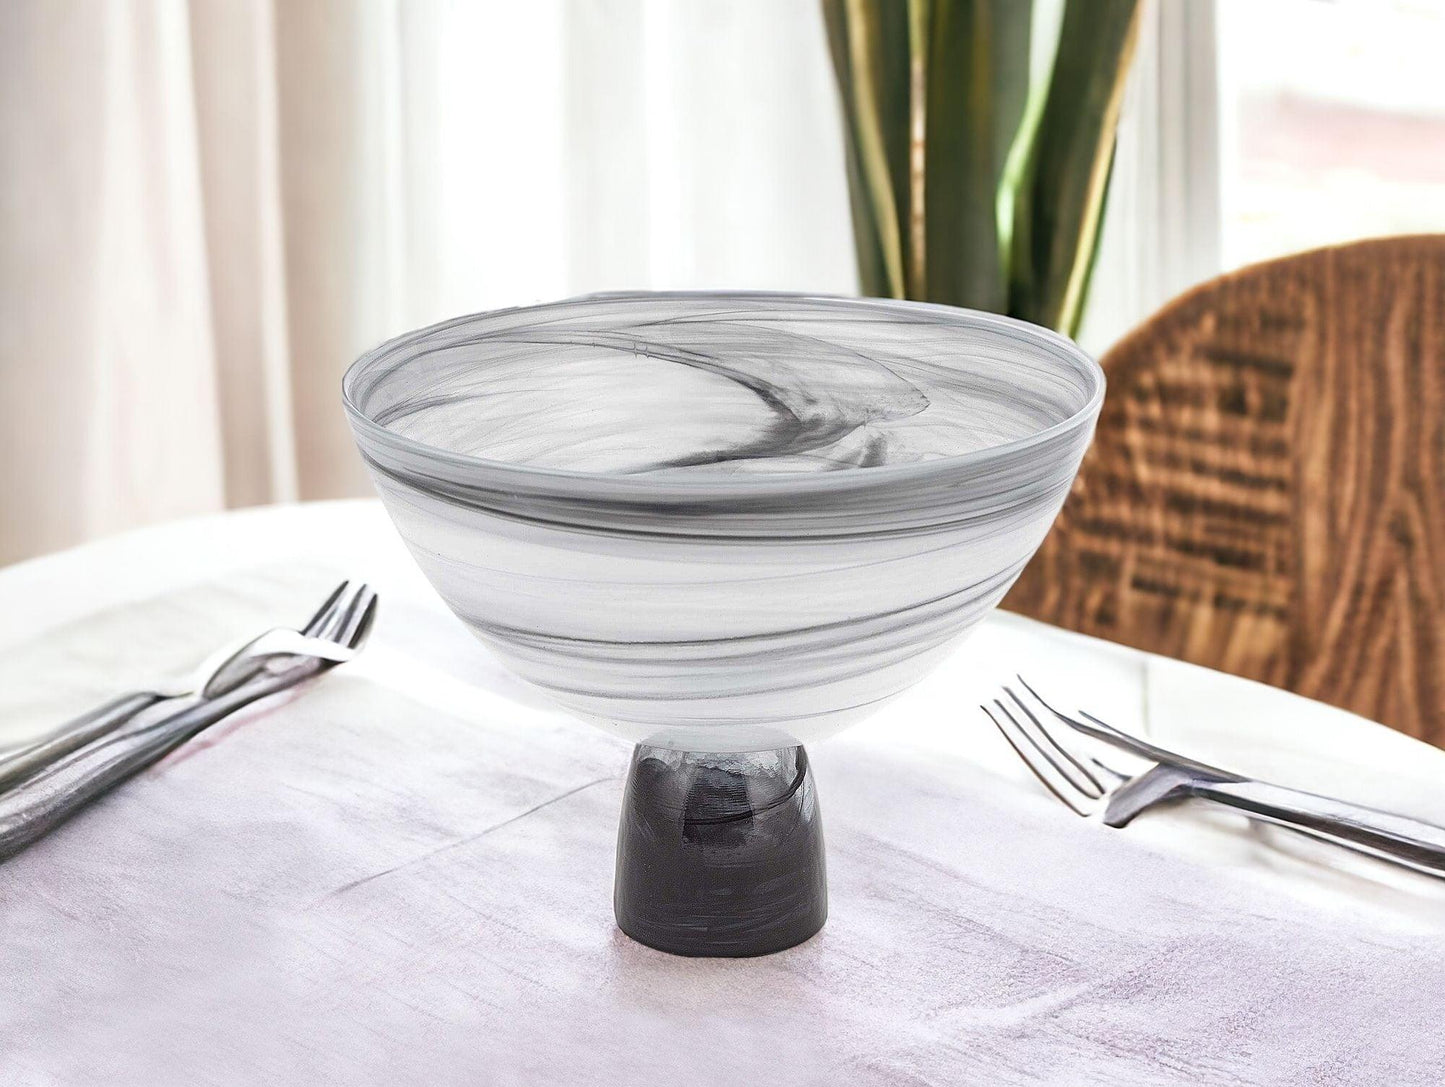 10" Black and Gray Swirl Mouth Blown Glass Footed Centerpiece Bowl - FurniFindUSA